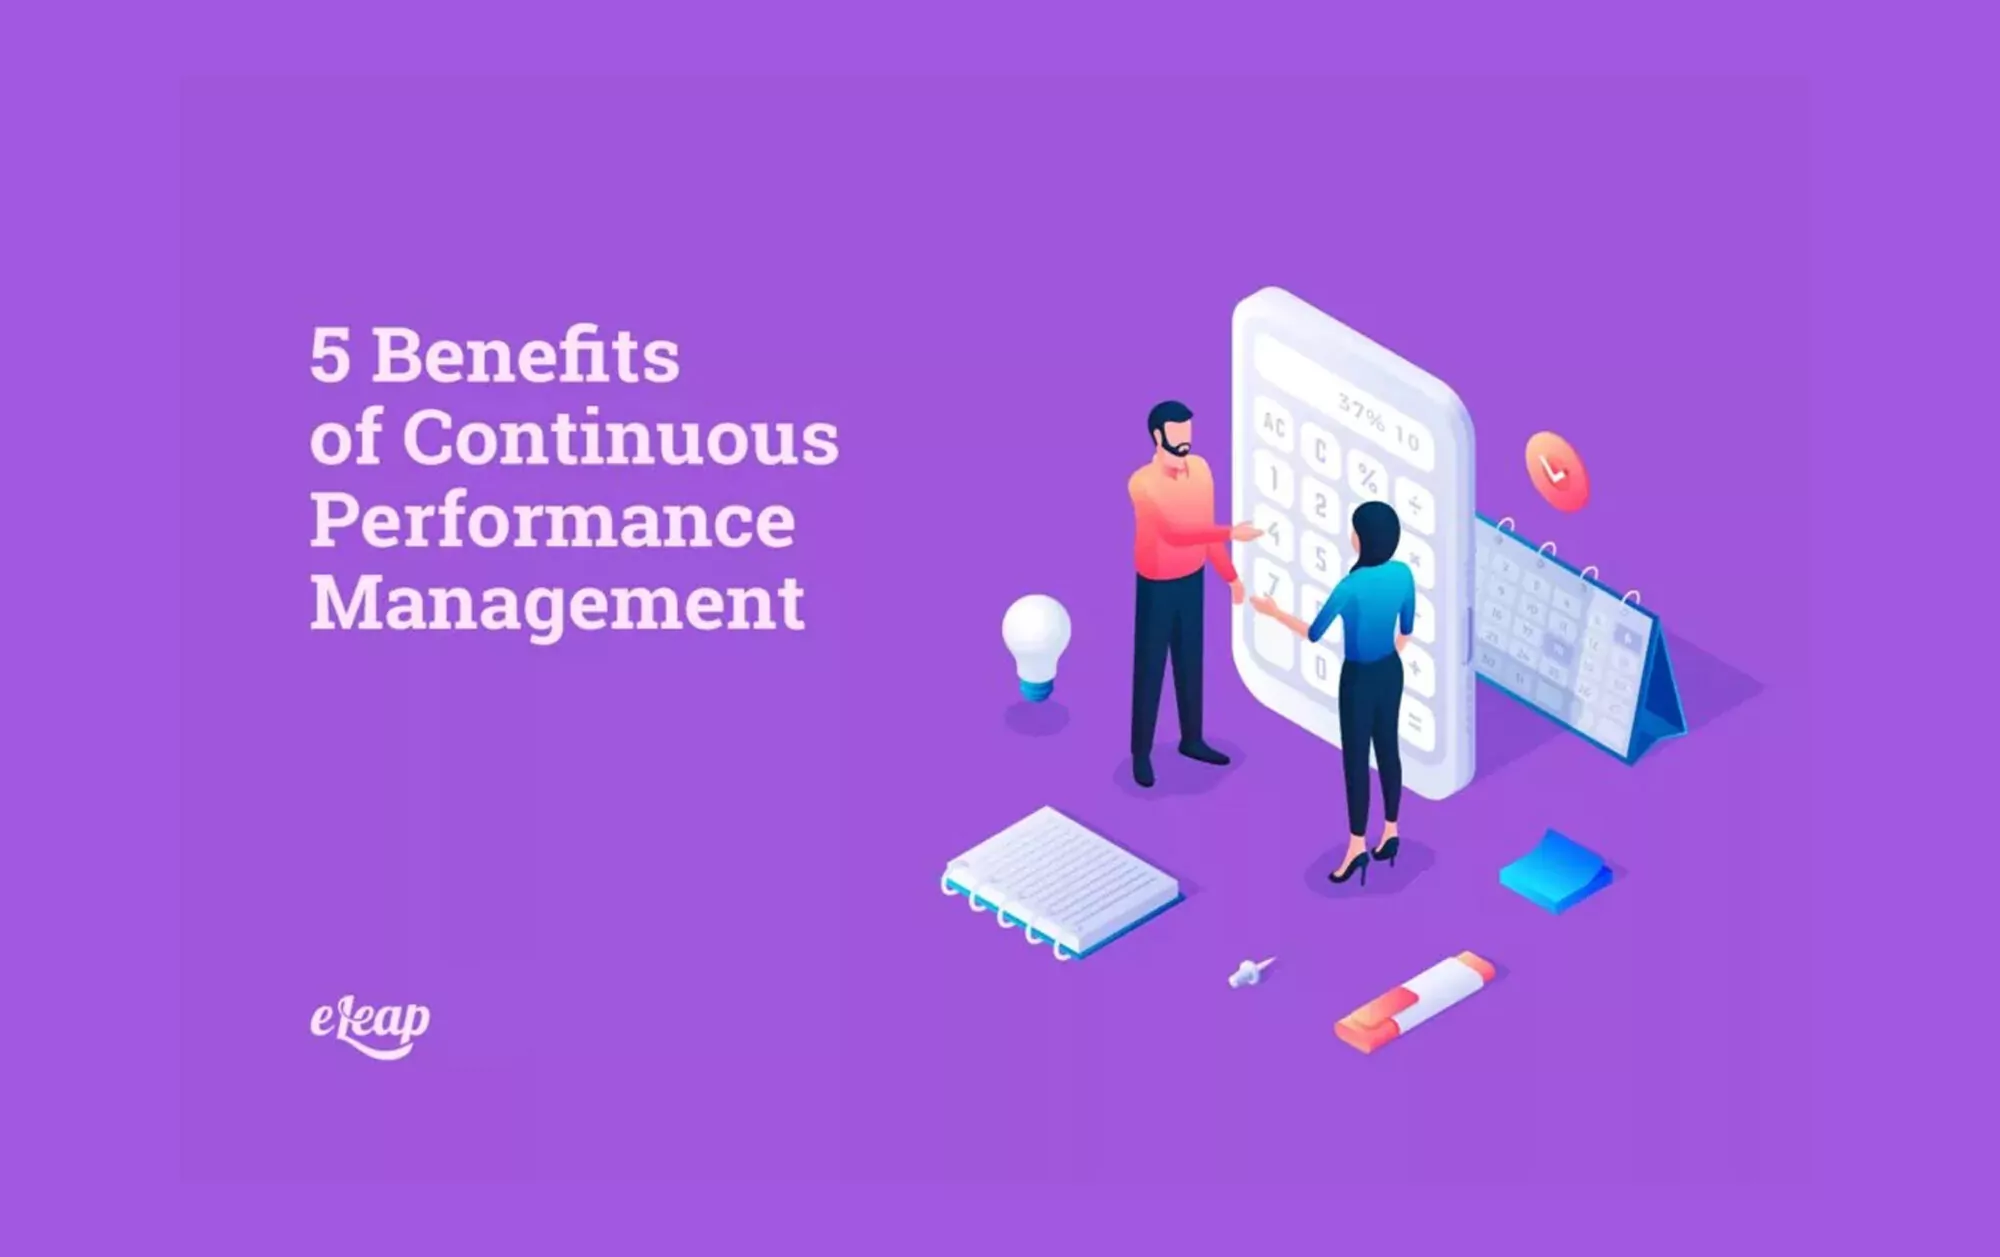 5 Benefits of Continuous Performance Management